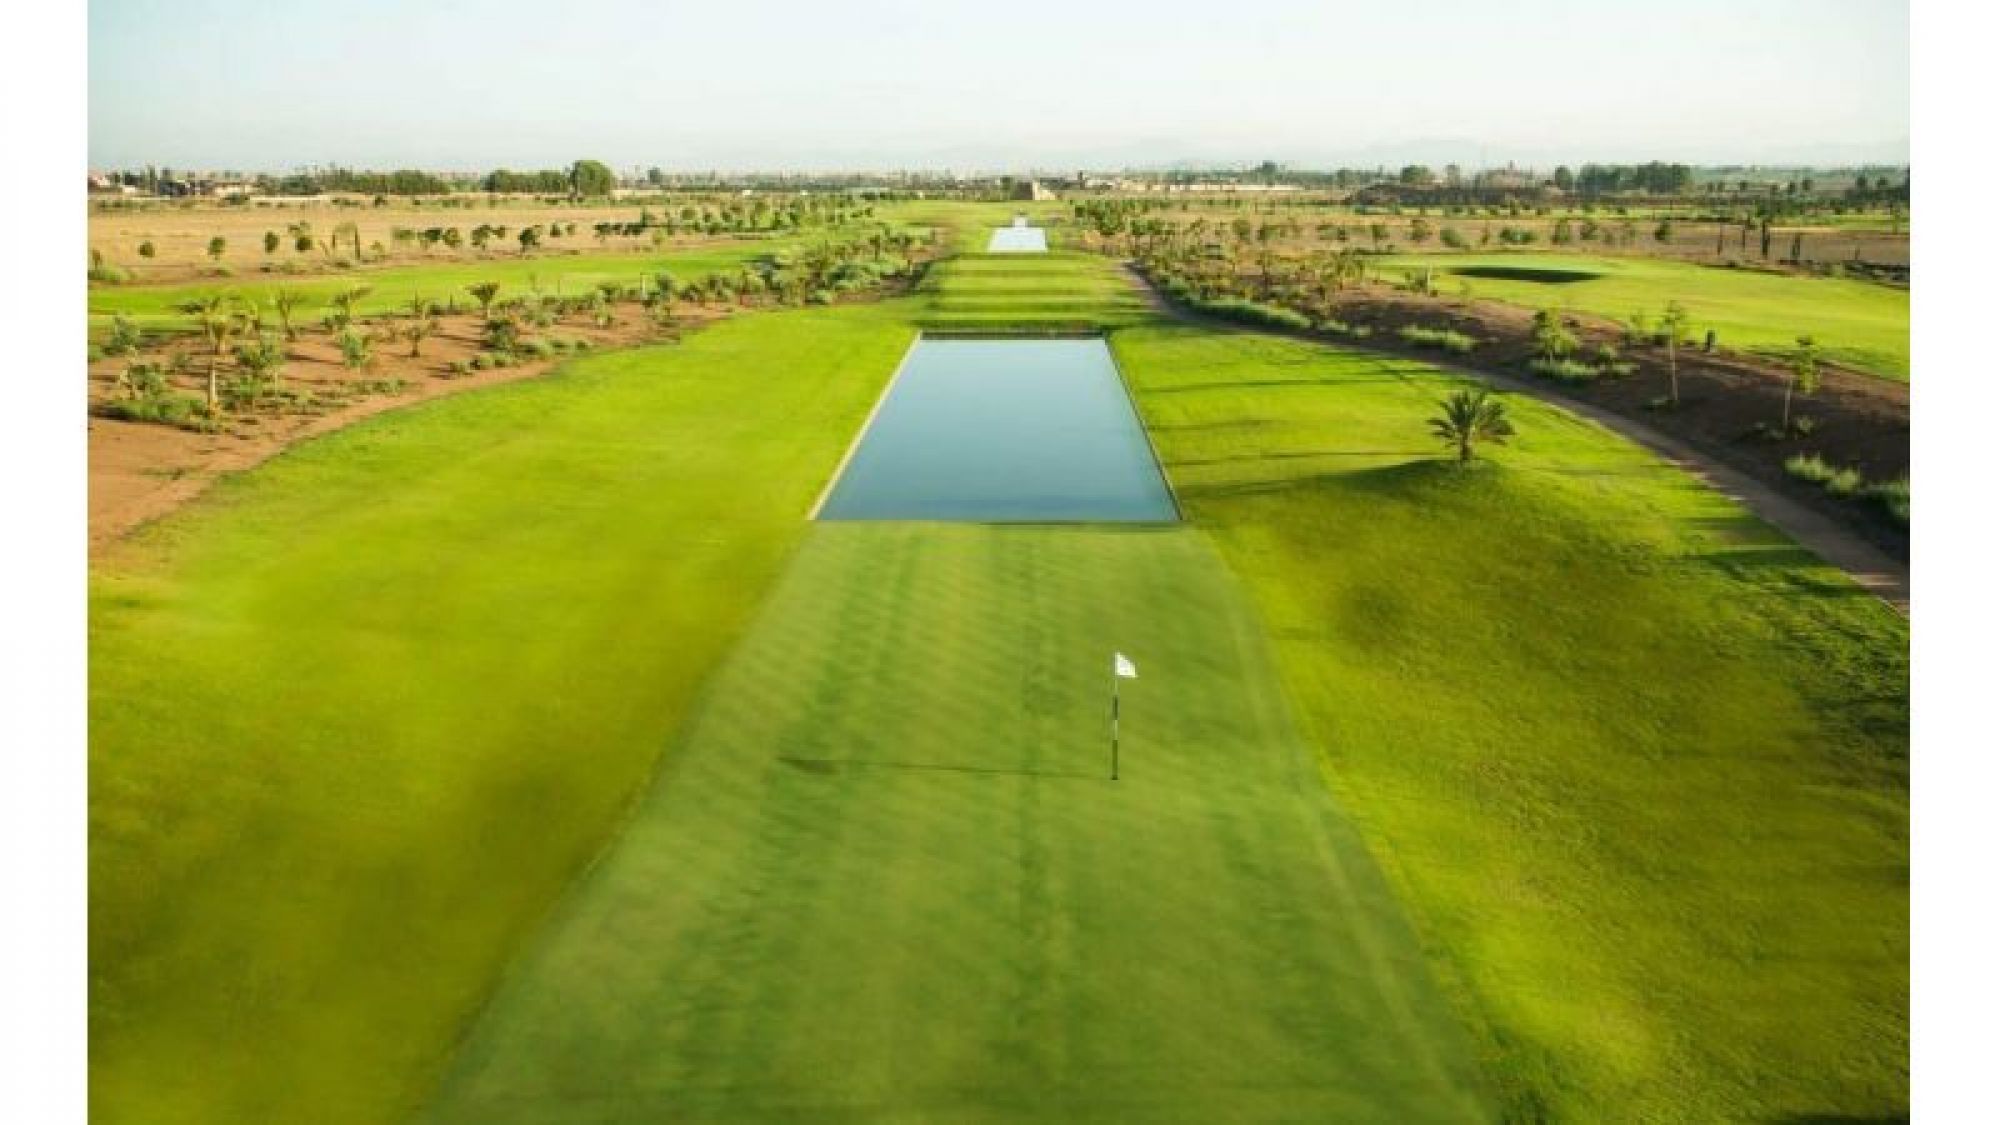 Noria Golf Club Marrakech consists of lots of the finest golf course near Morocco